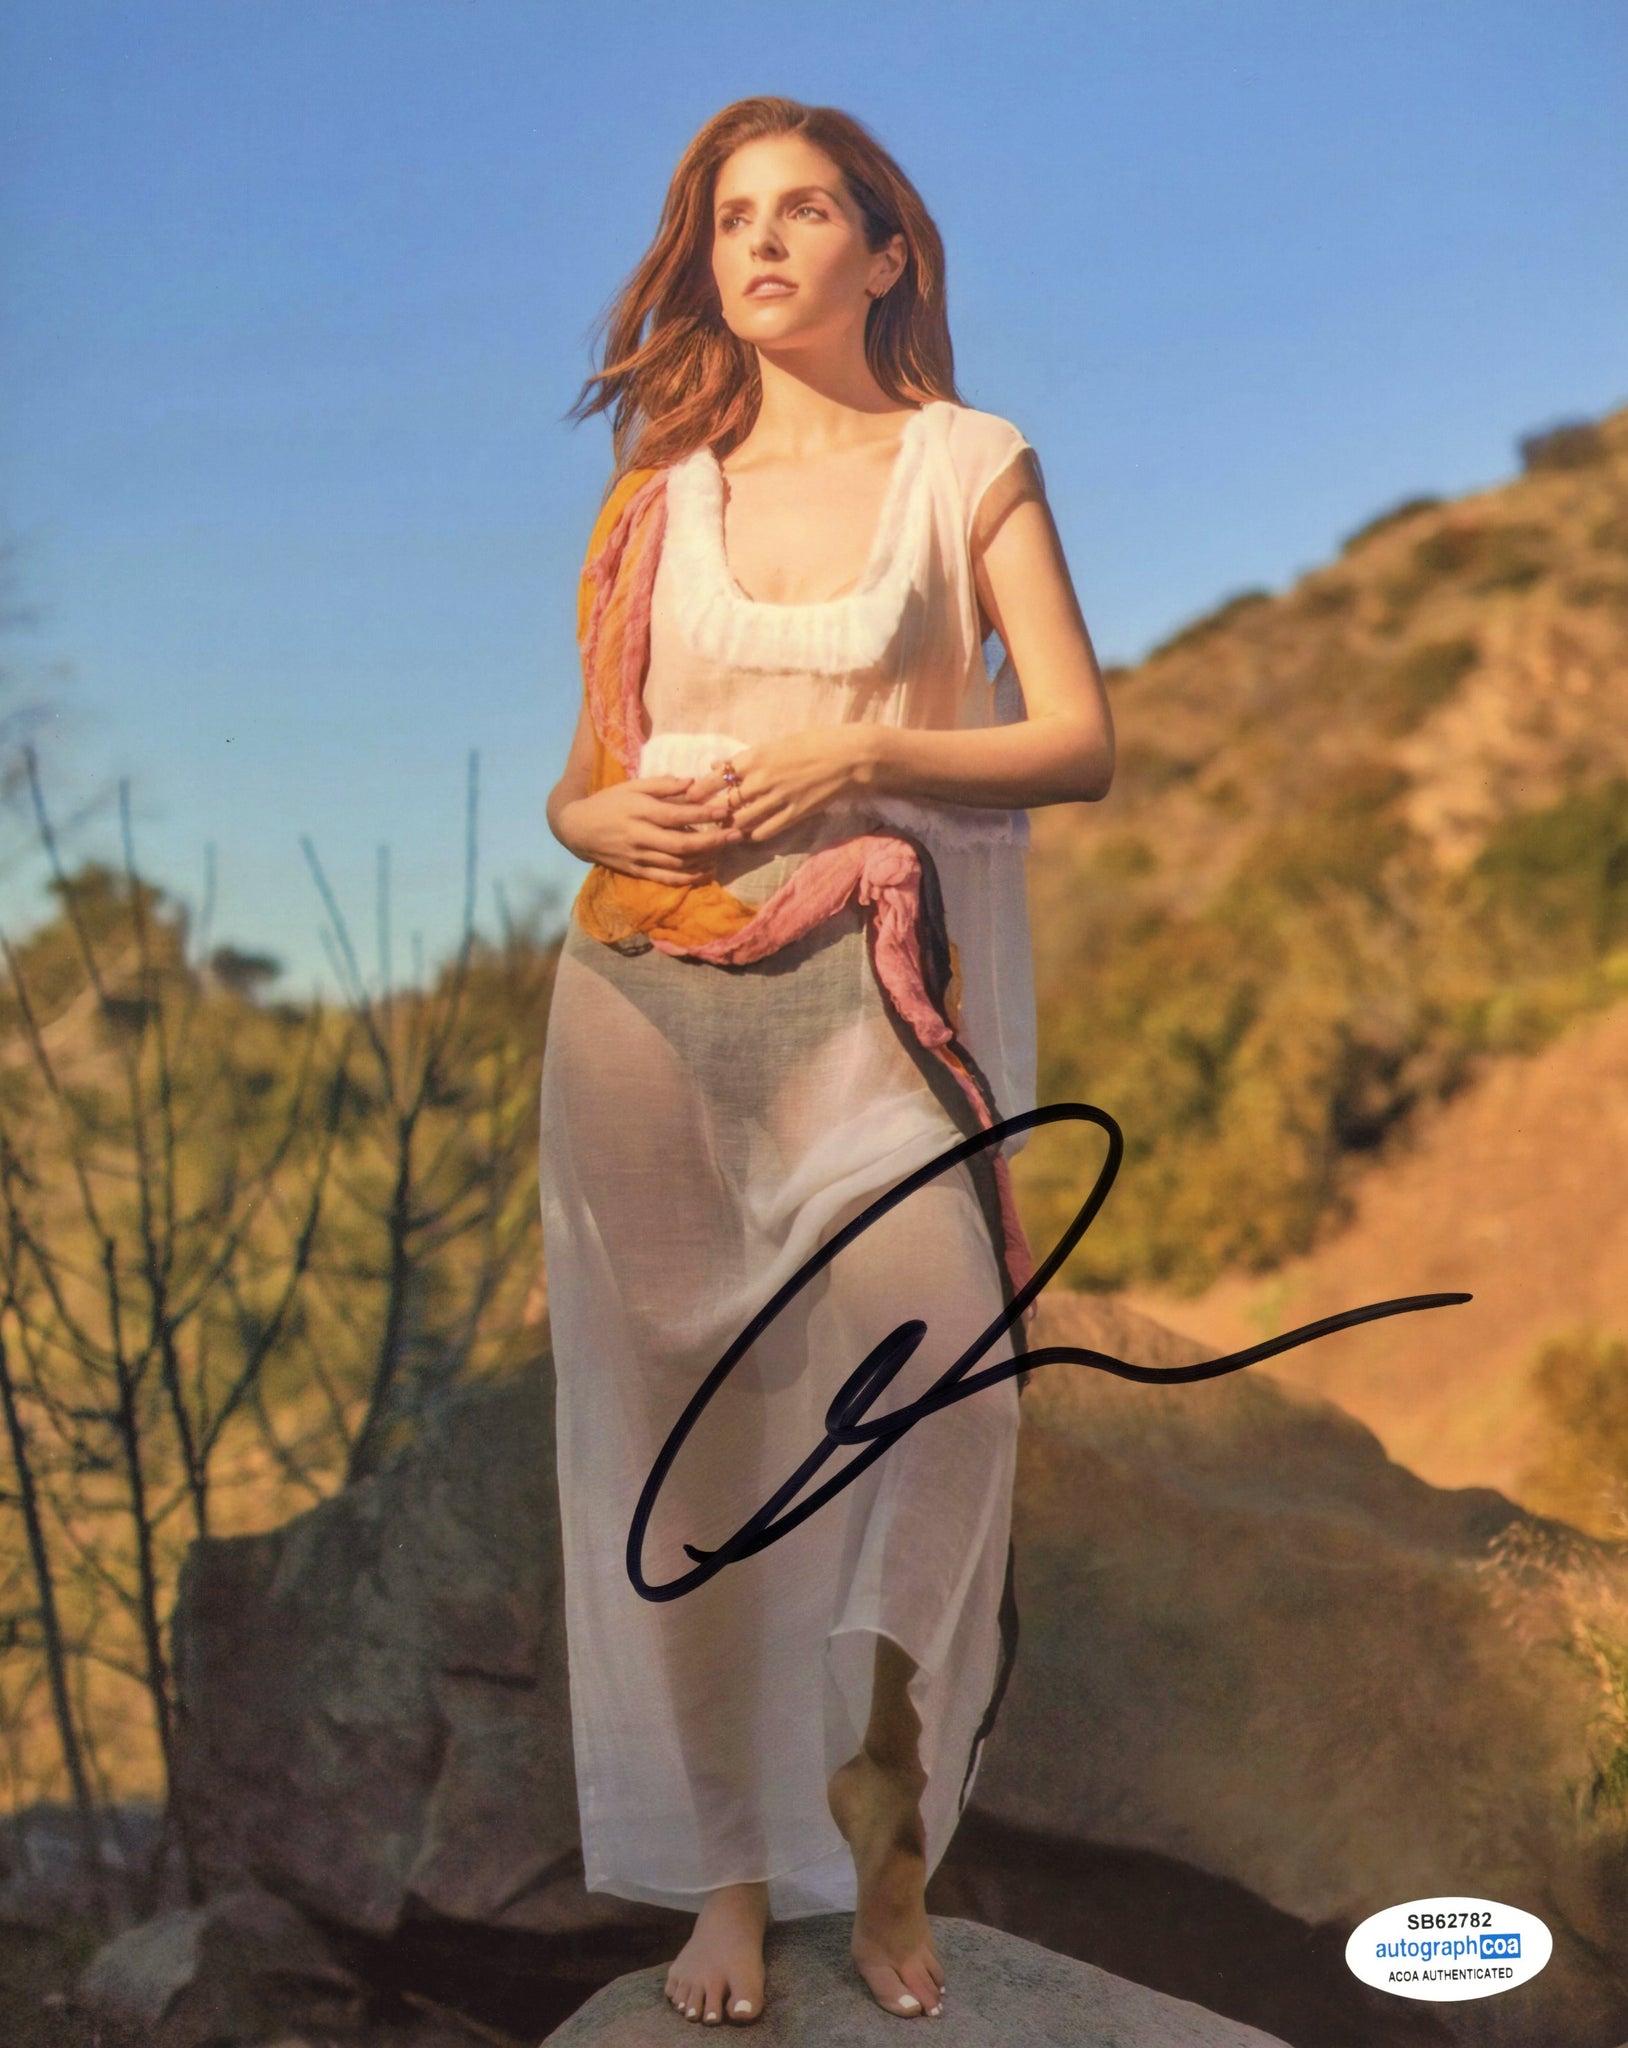 Anna Kendrick Sexy Signed Autograph 8x10 Photo Acoa Outlaw Hobbies Authentic Autographs